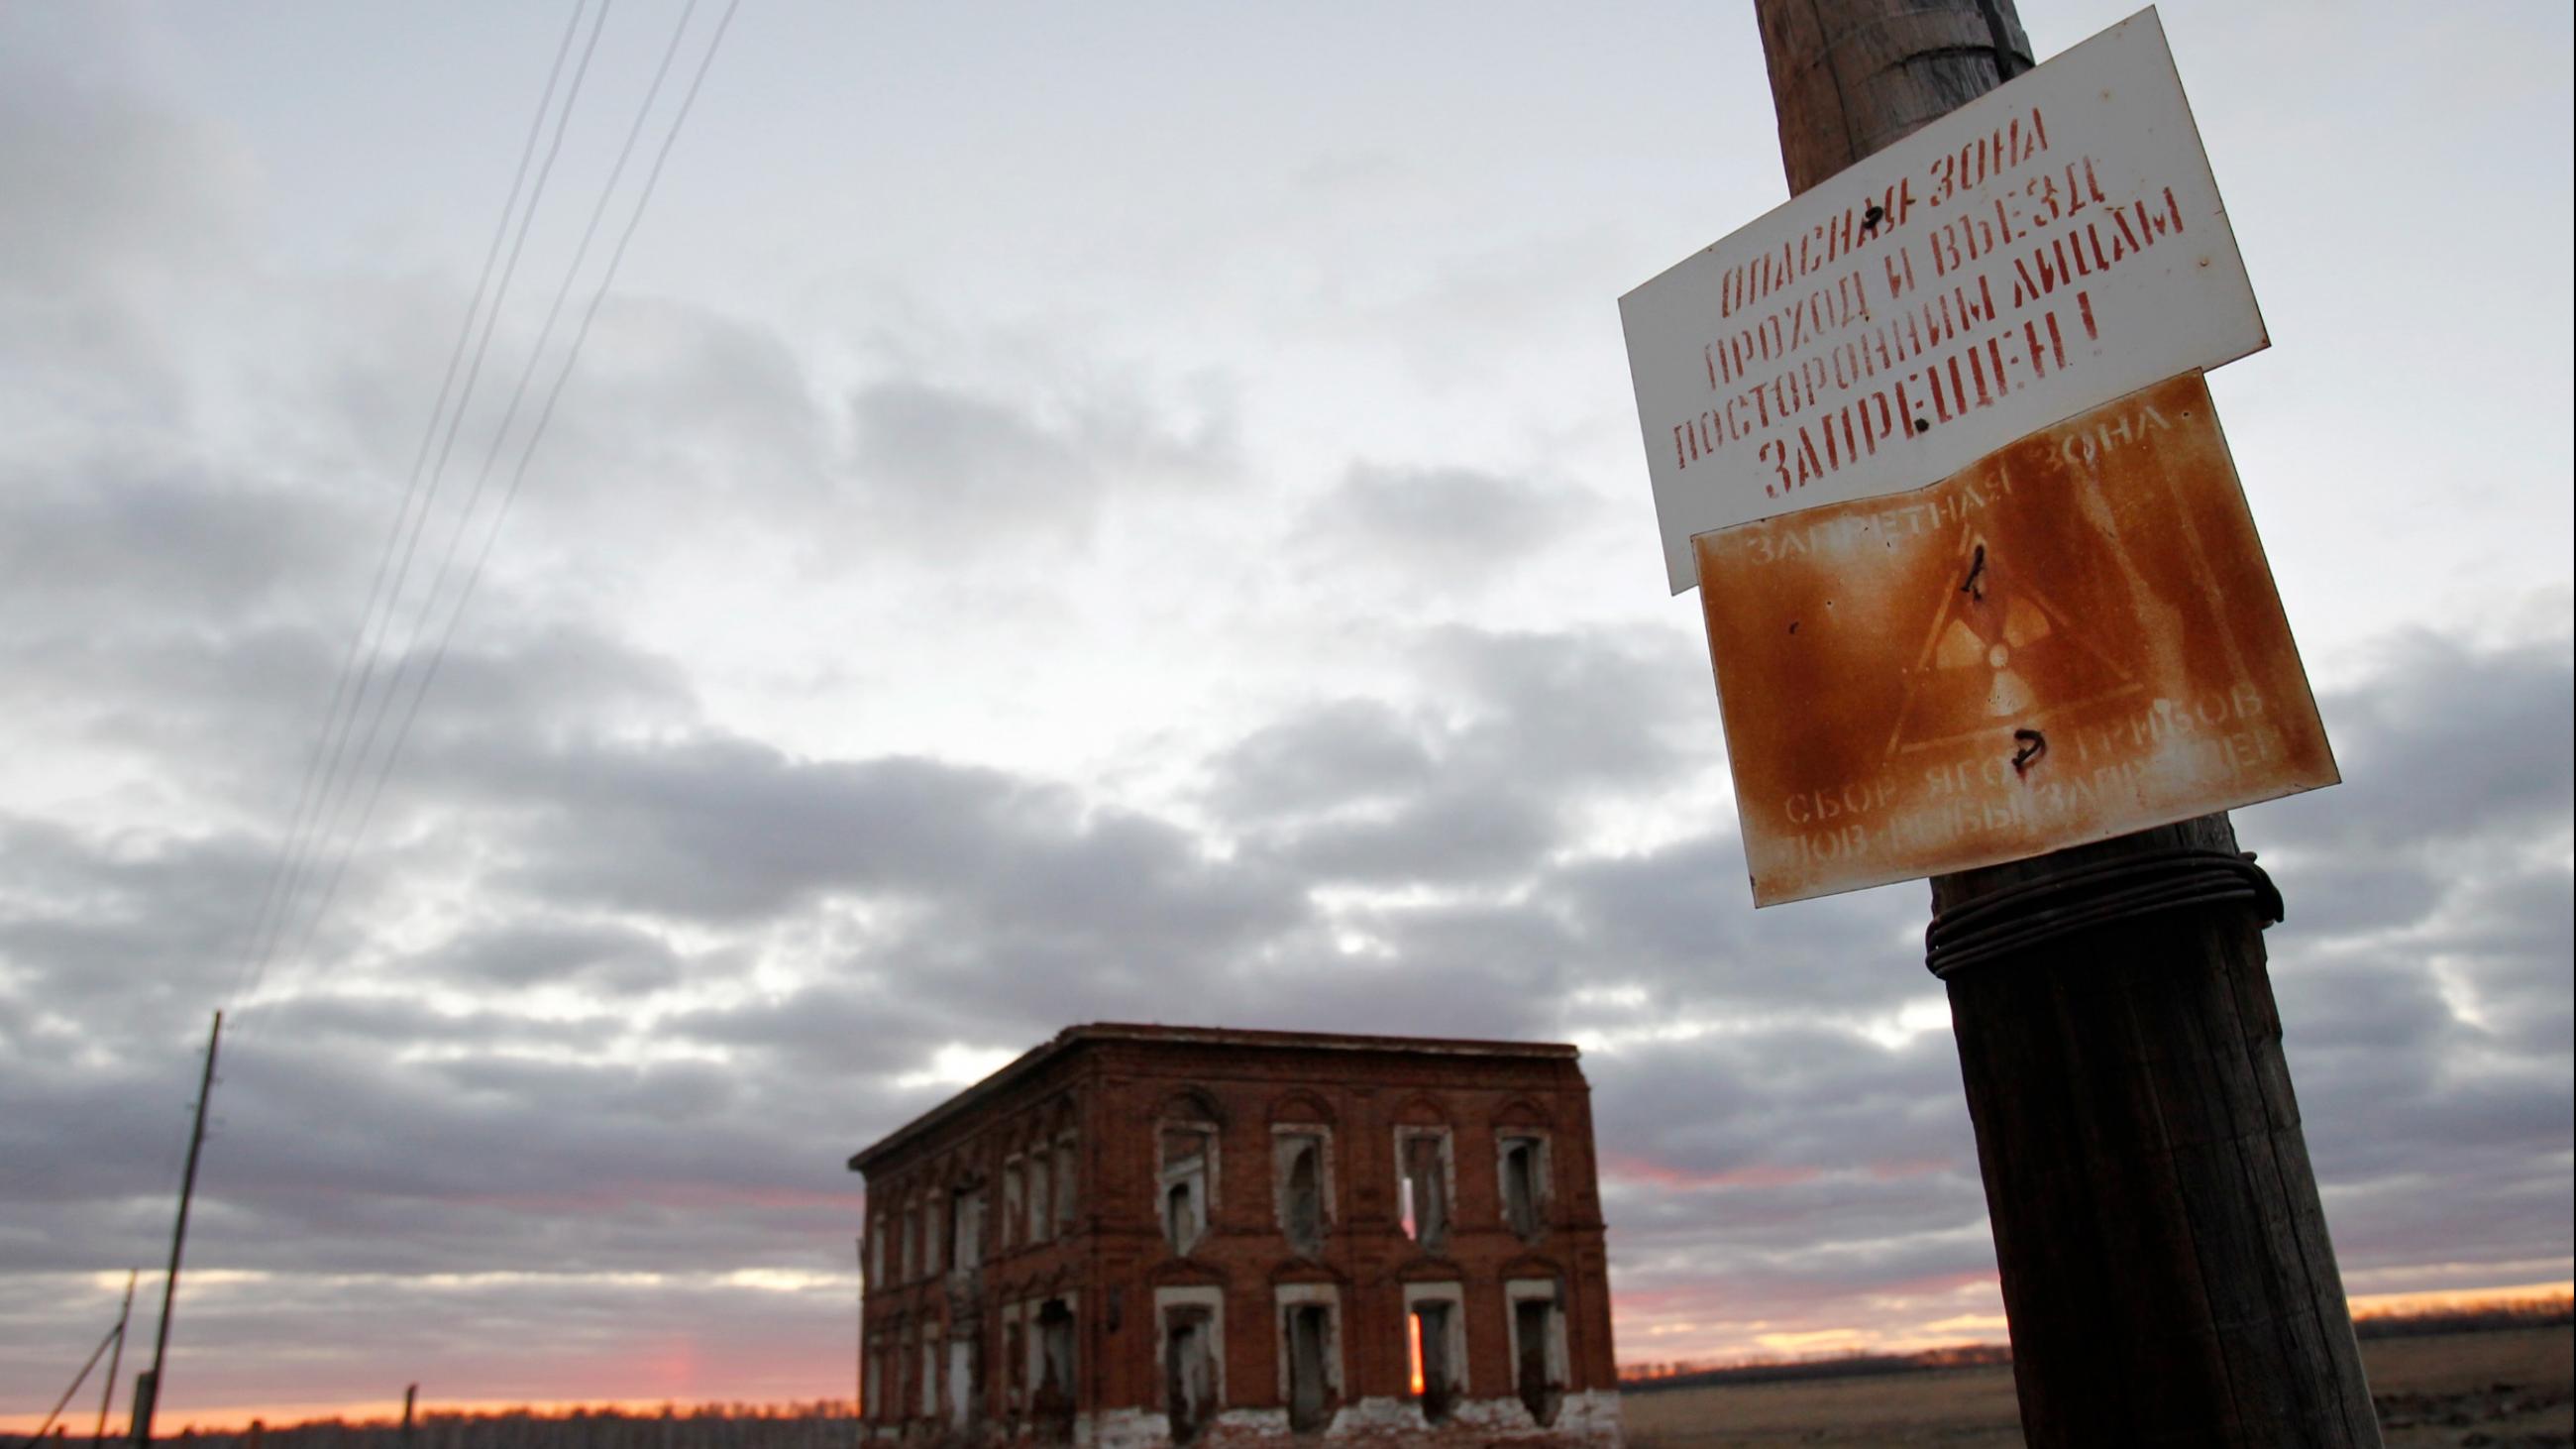 A rusted sign forbidding the gathering of mushrooms, picking berries and fishing is seen in front of an abandoned school which is silhouetted by a cloud-covered blue and orange sunset